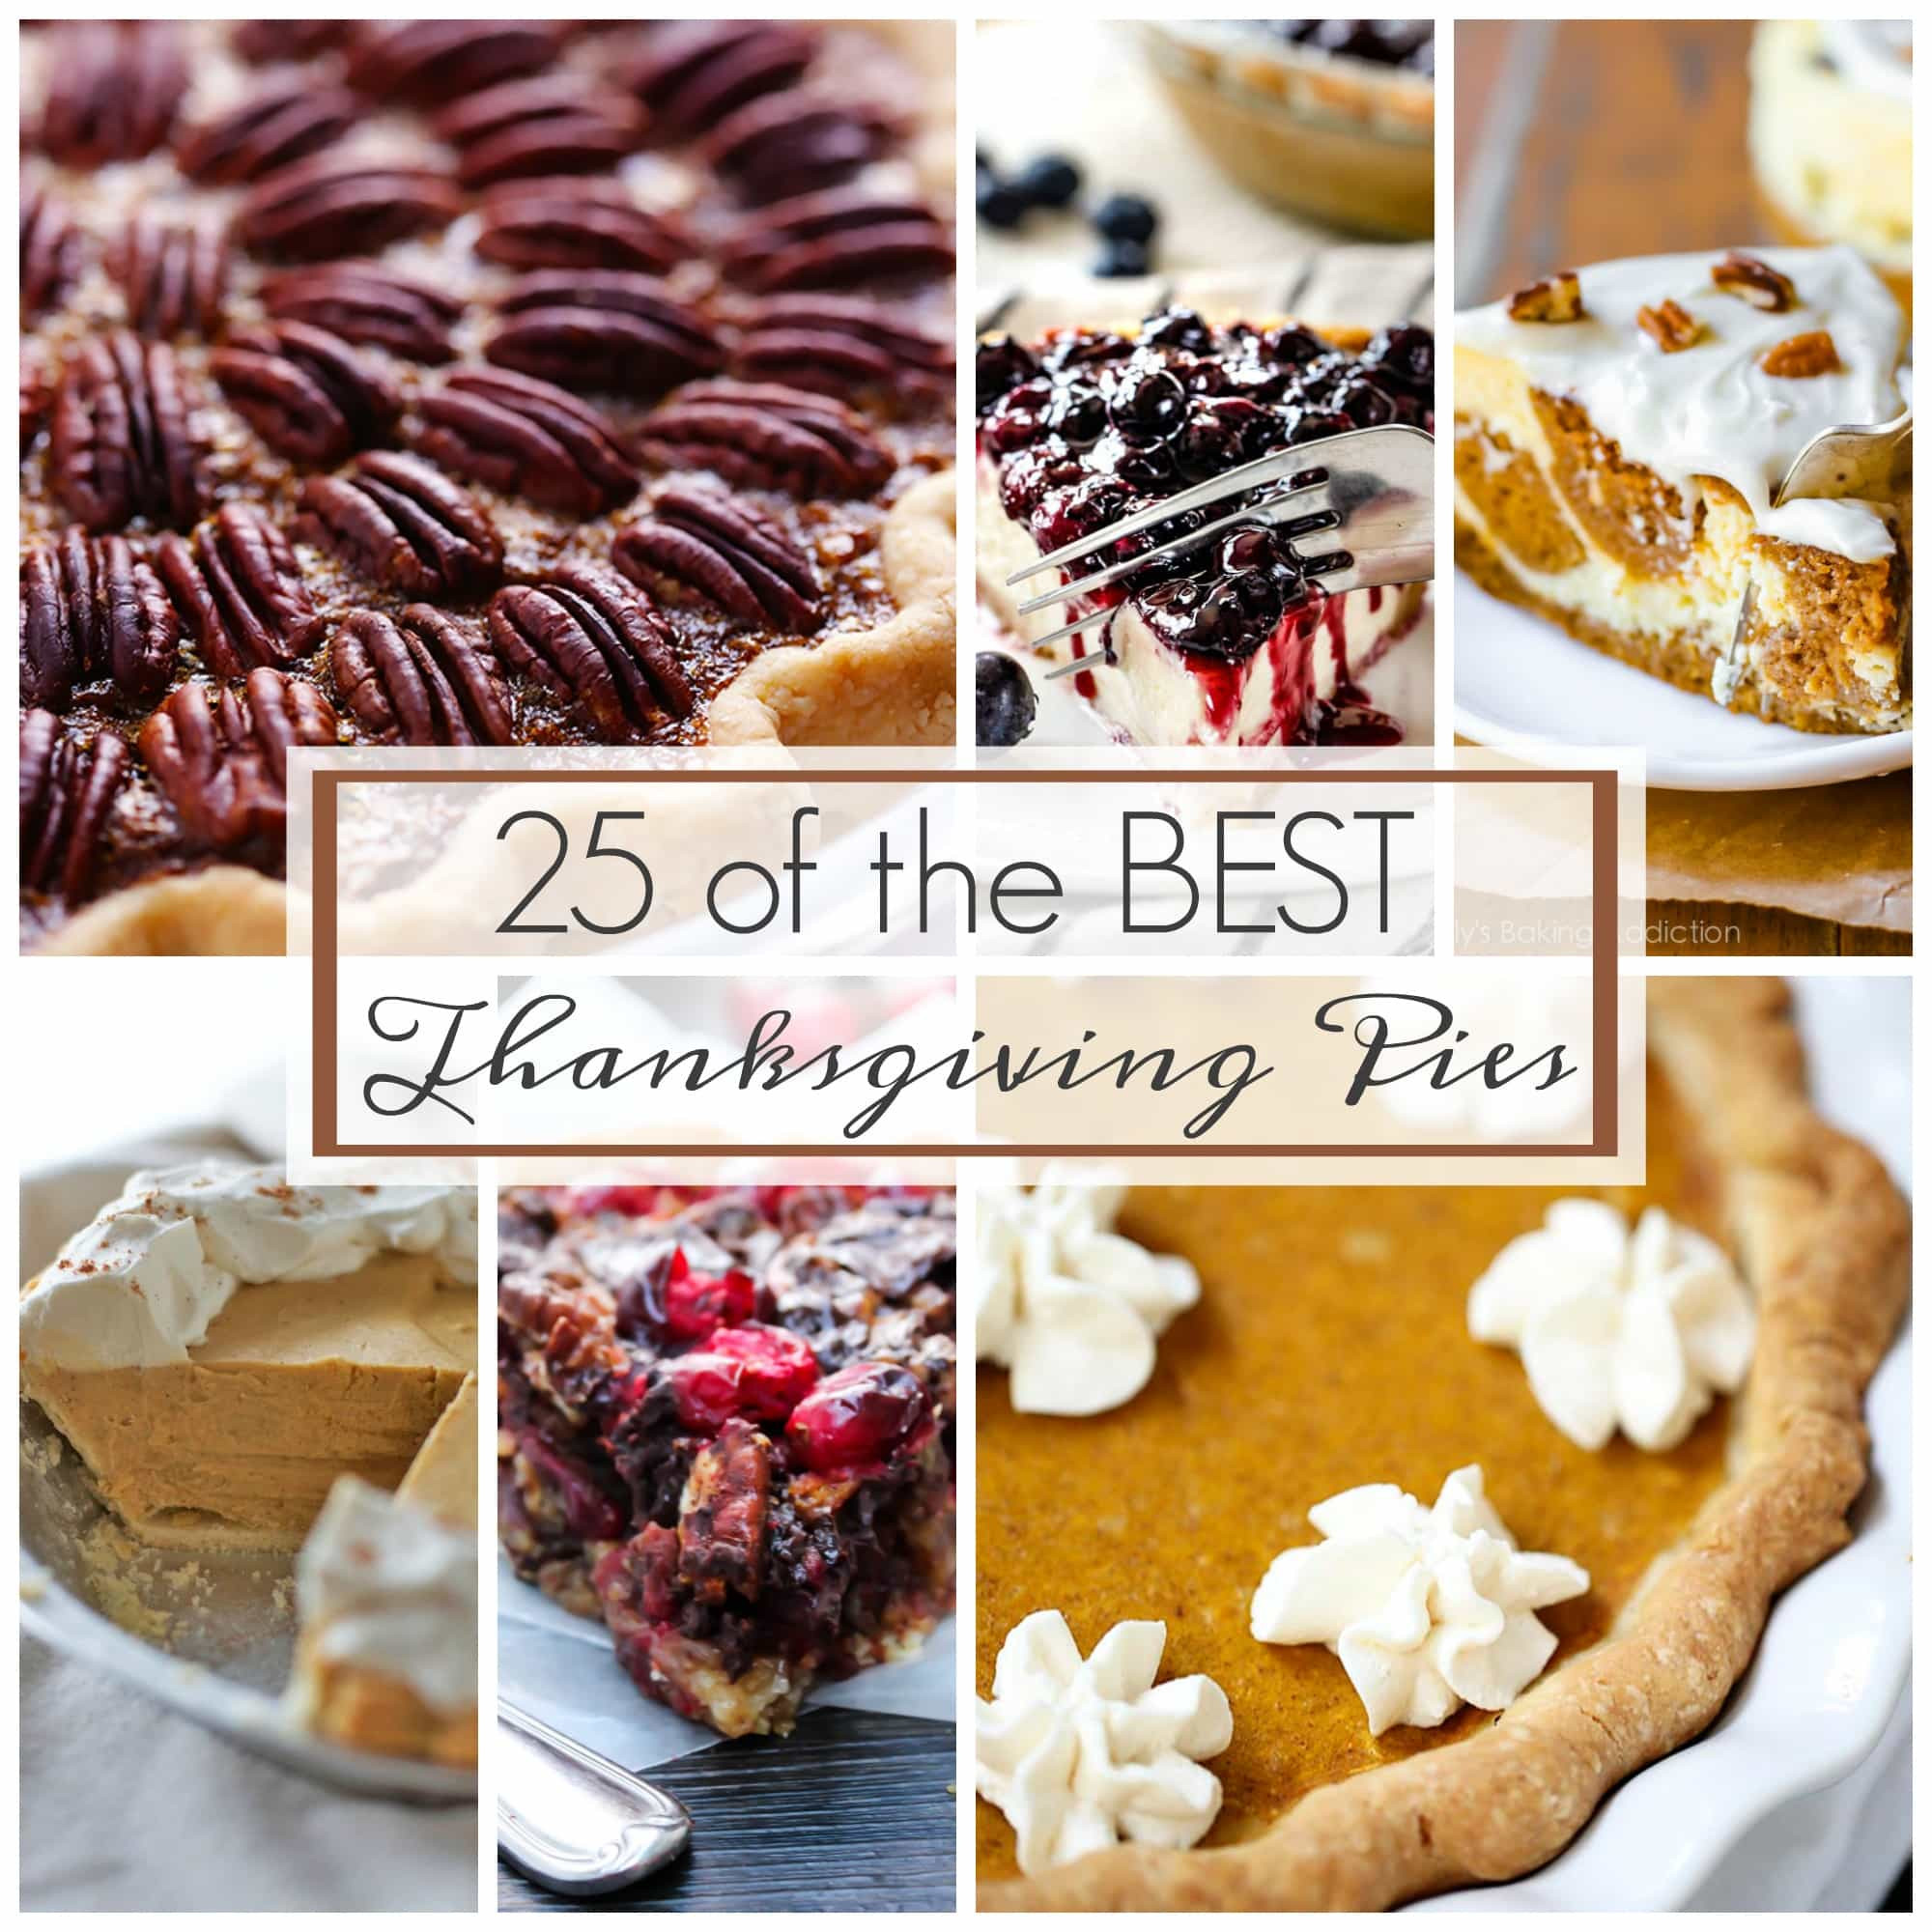 Pies For Thanksgiving
 25 of the Best Thanksgiving Pies A Dash of Sanity